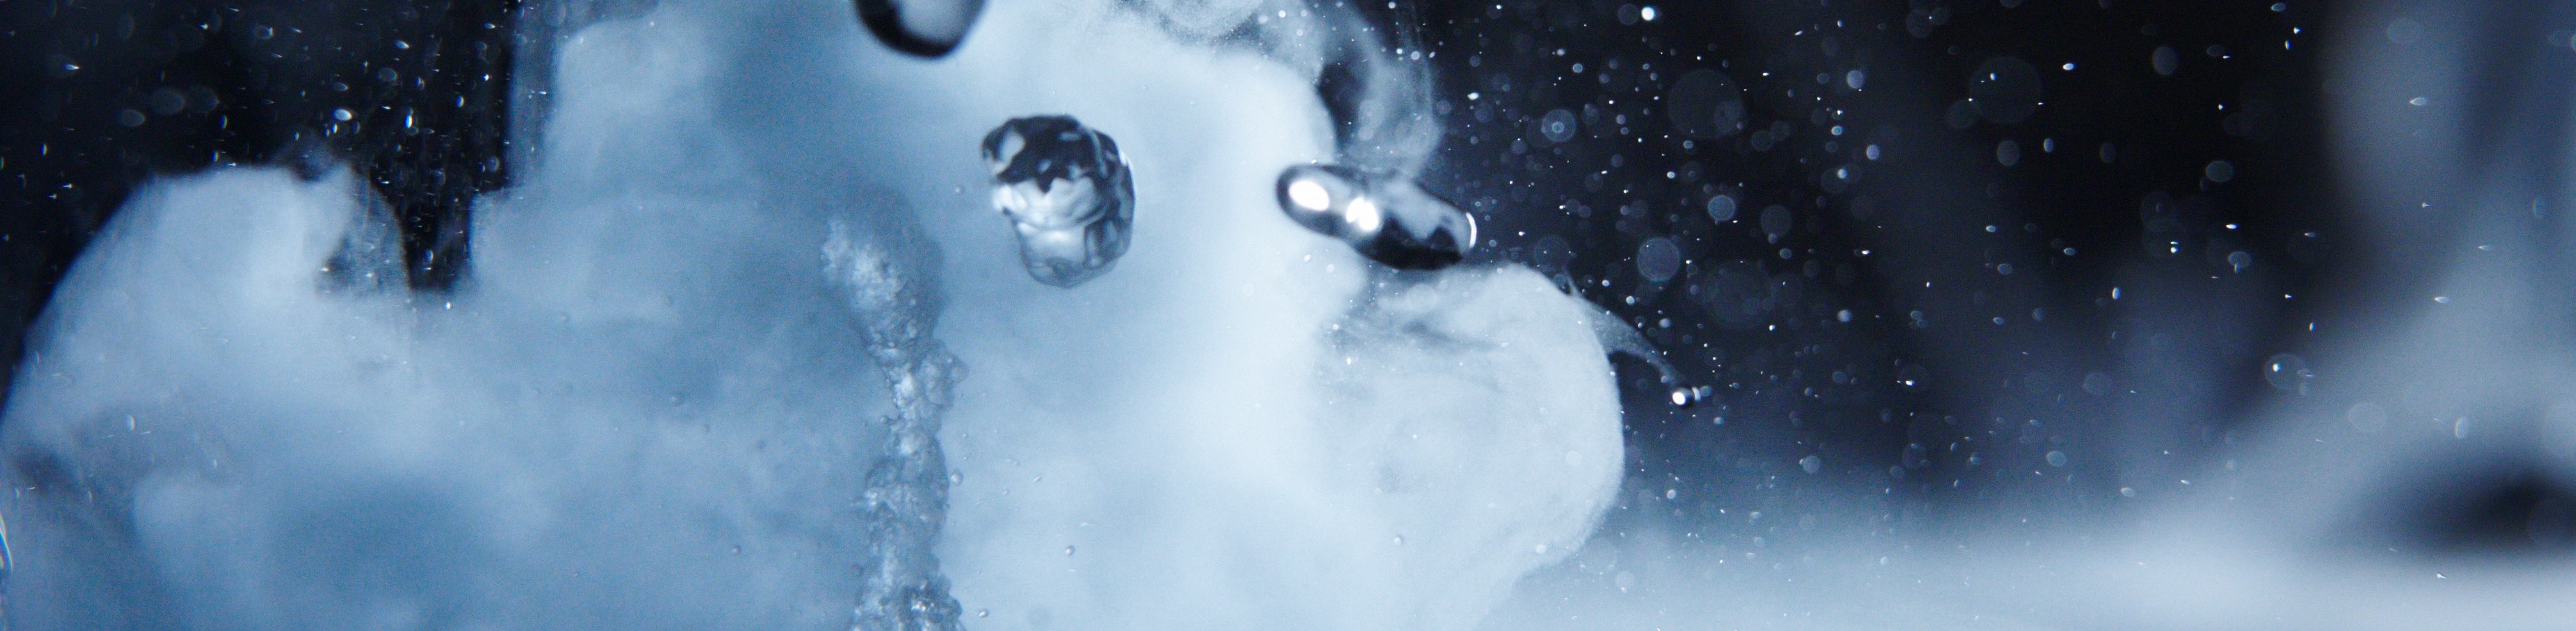 A stylistic photo of water droplets and steam